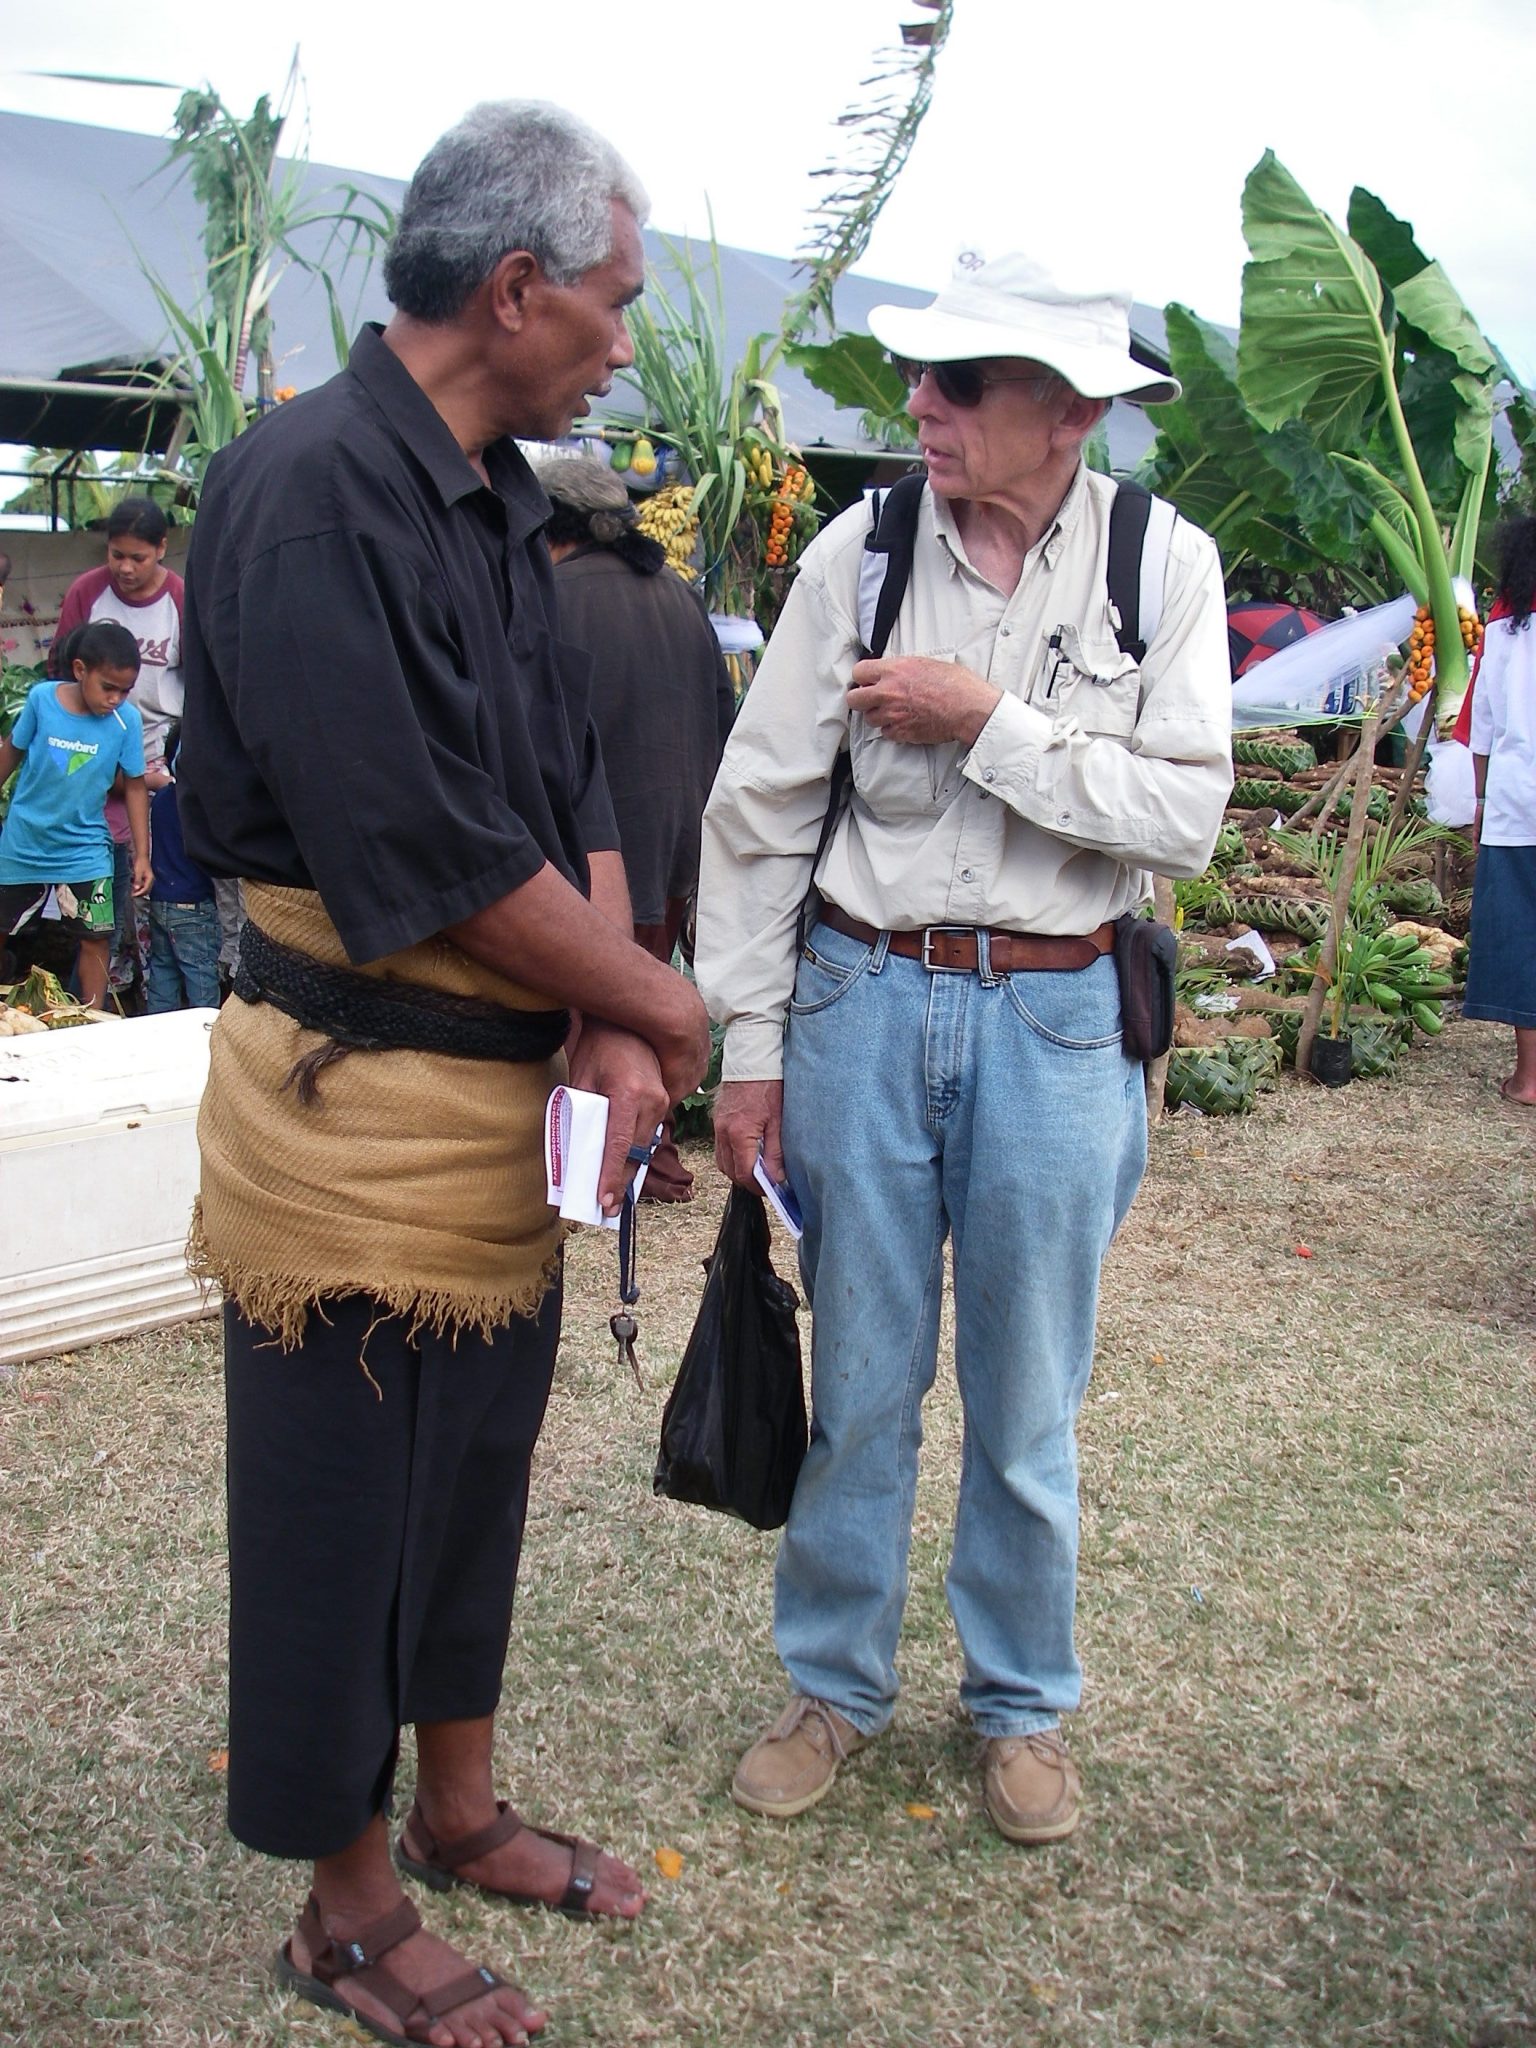 89. Jeff speaks to Soakai at the Agricultural Show